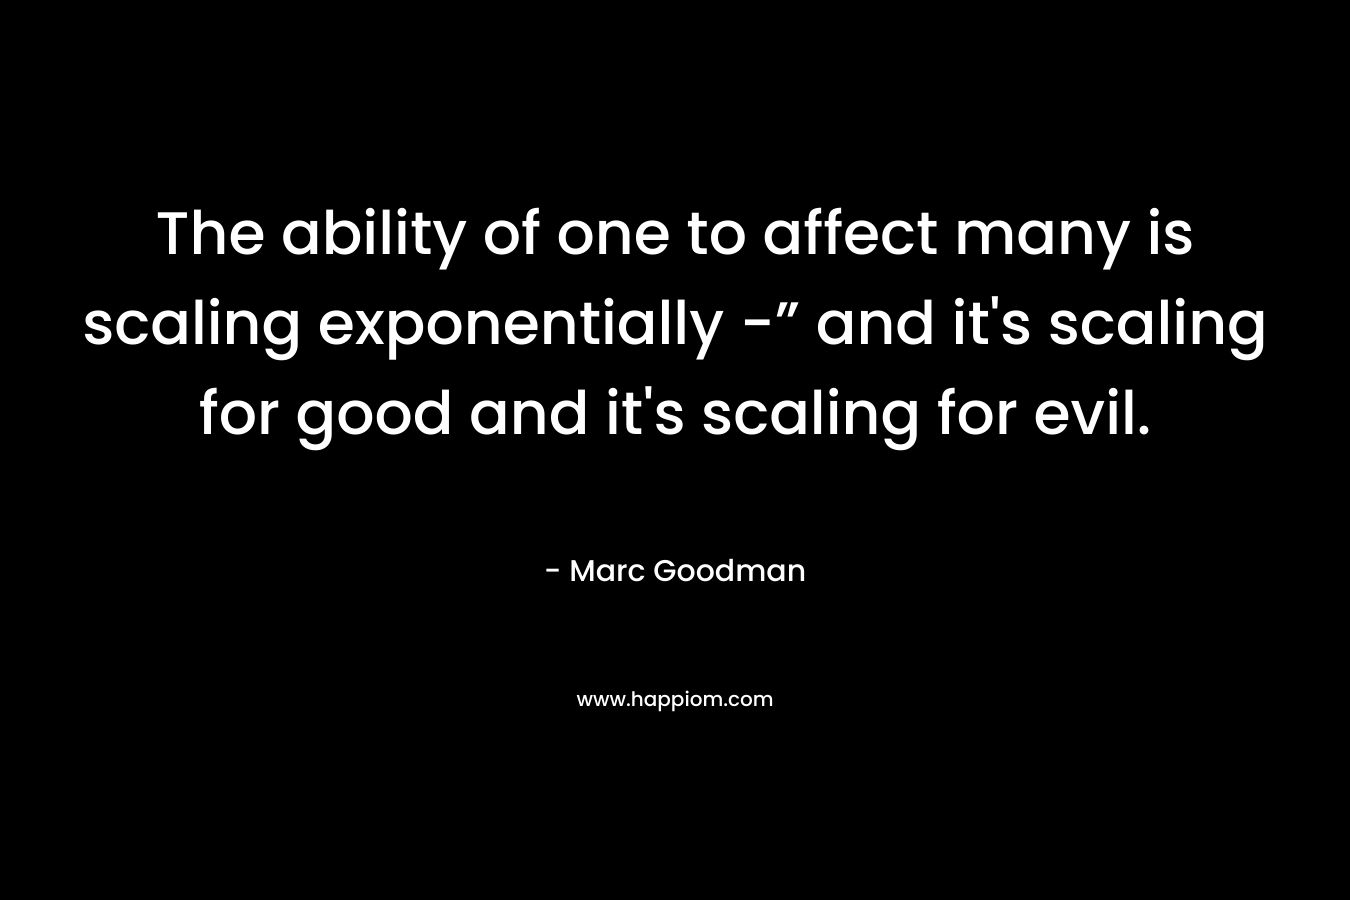 The ability of one to affect many is scaling exponentially -” and it's scaling for good and it's scaling for evil.